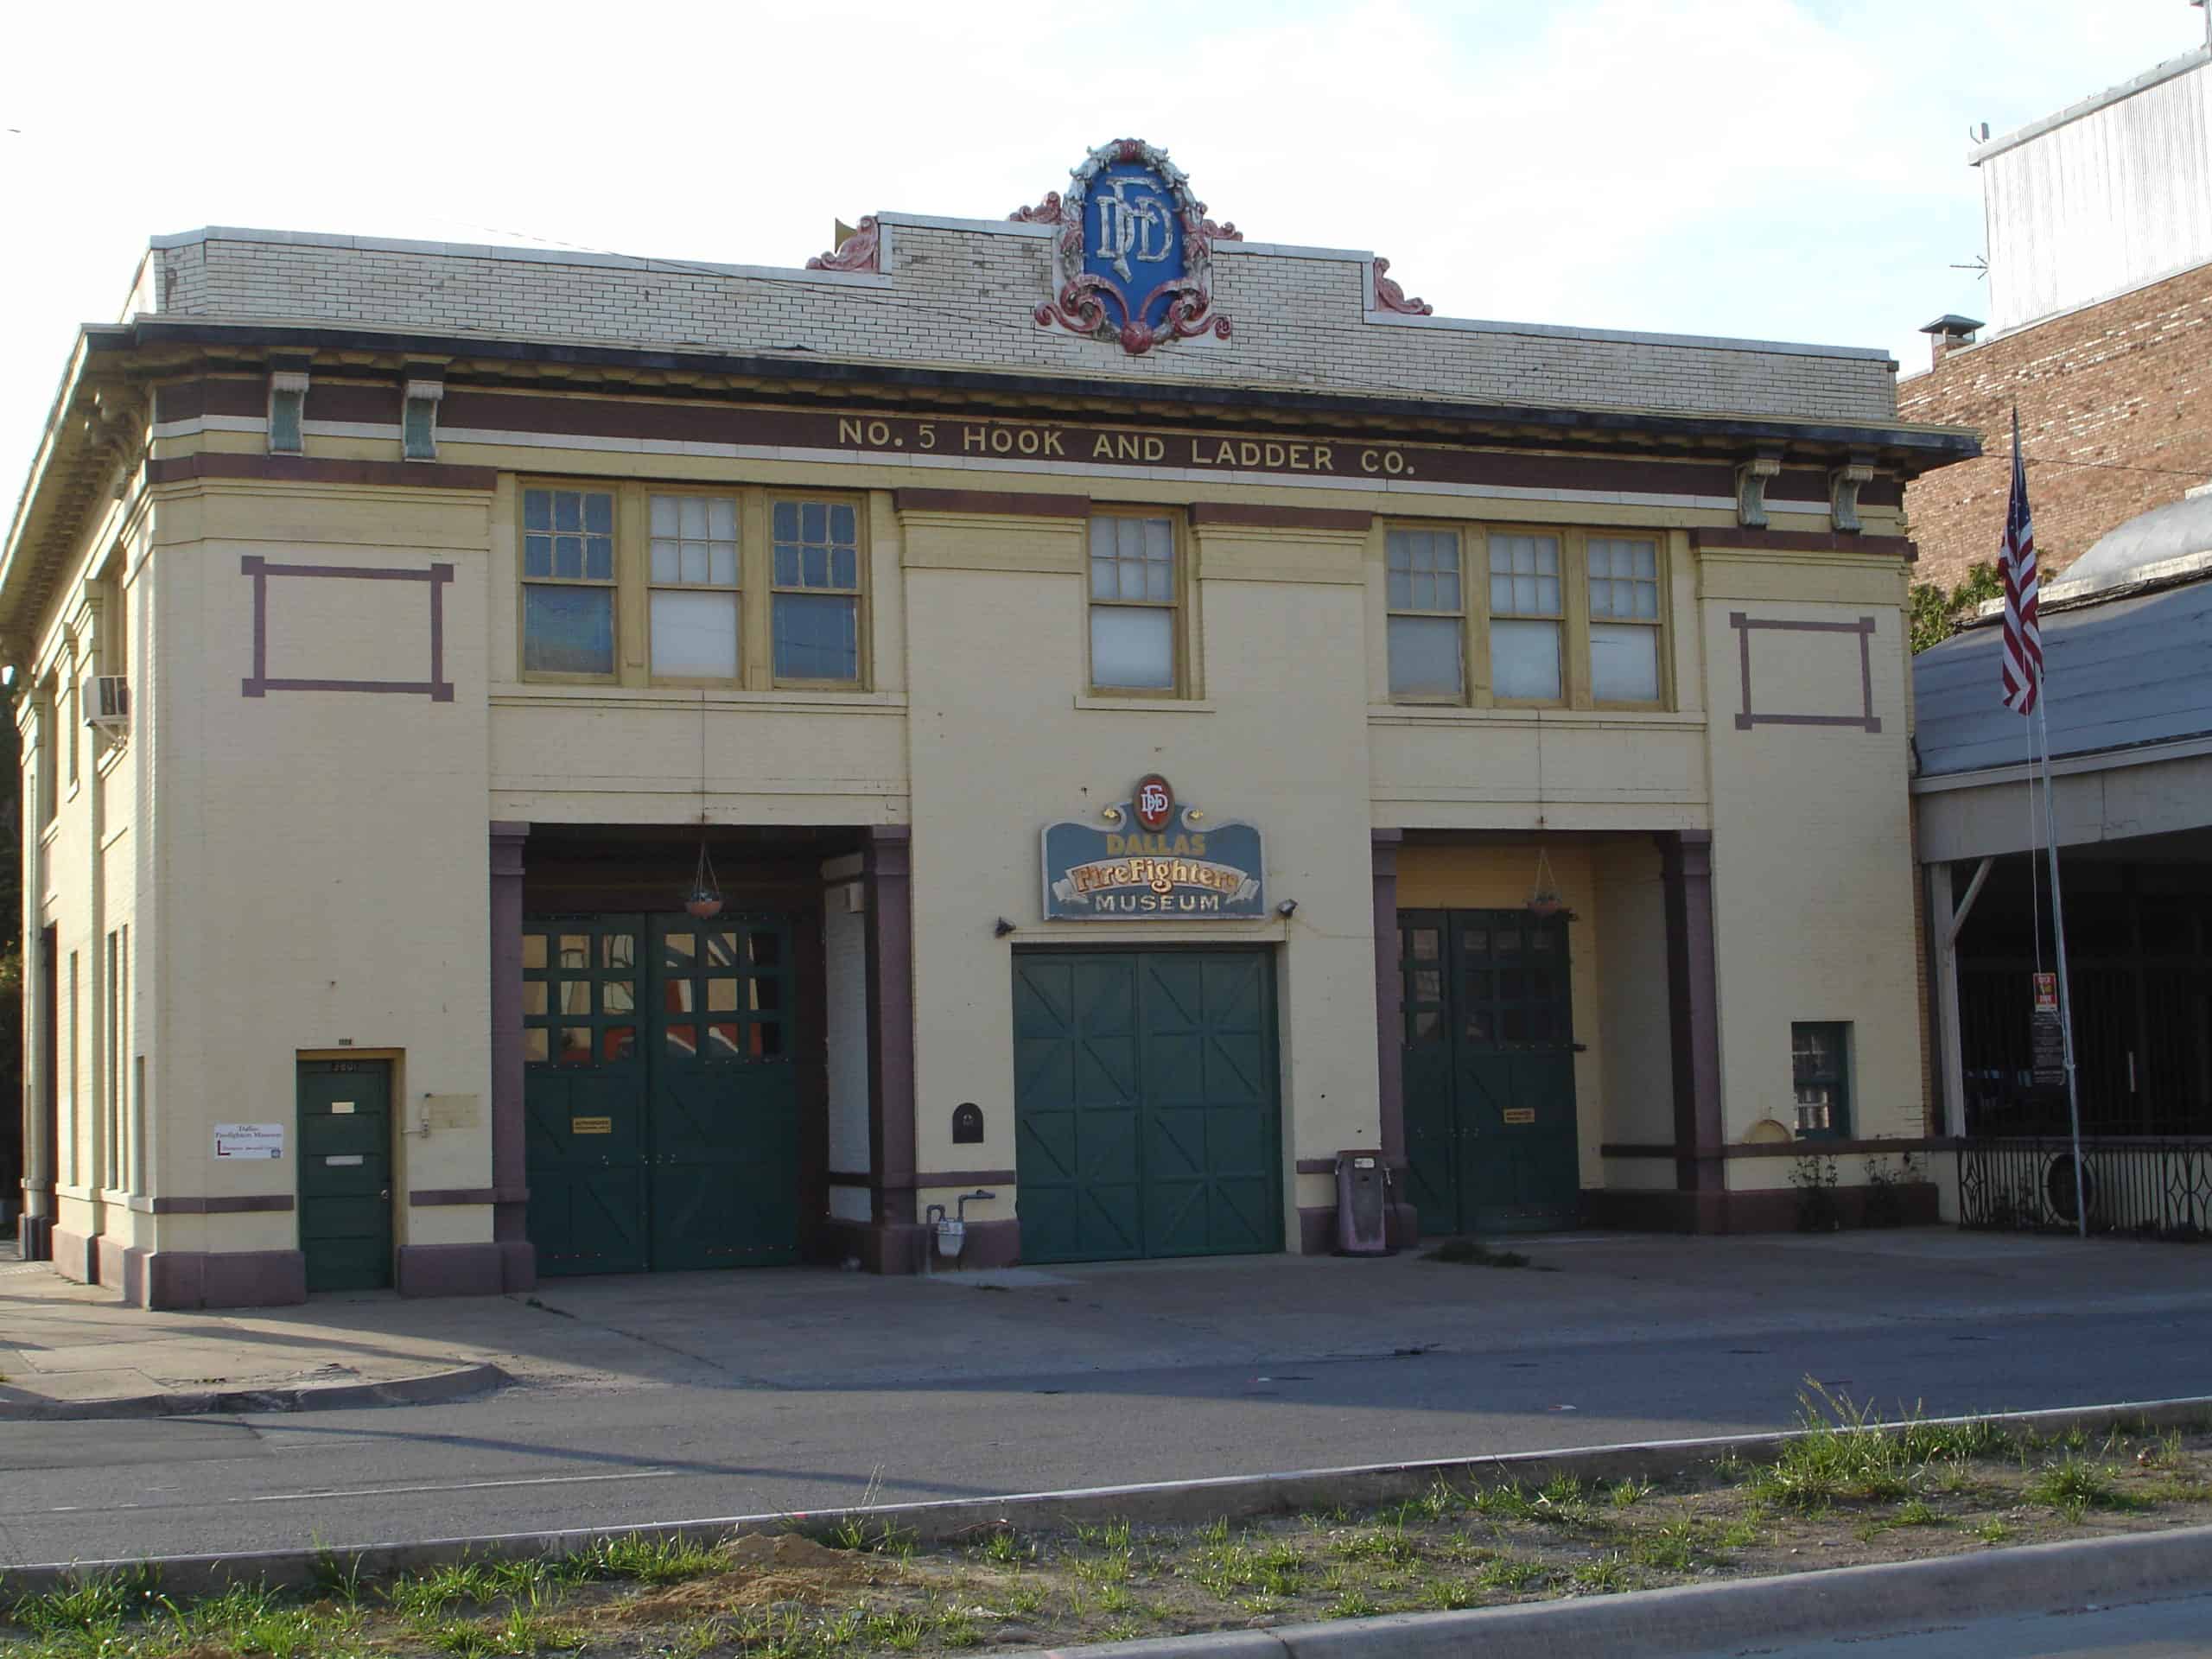 Best things to do in Dallas Texas - Harry Hall - photo courtesy of Dallas Firefighter Museum